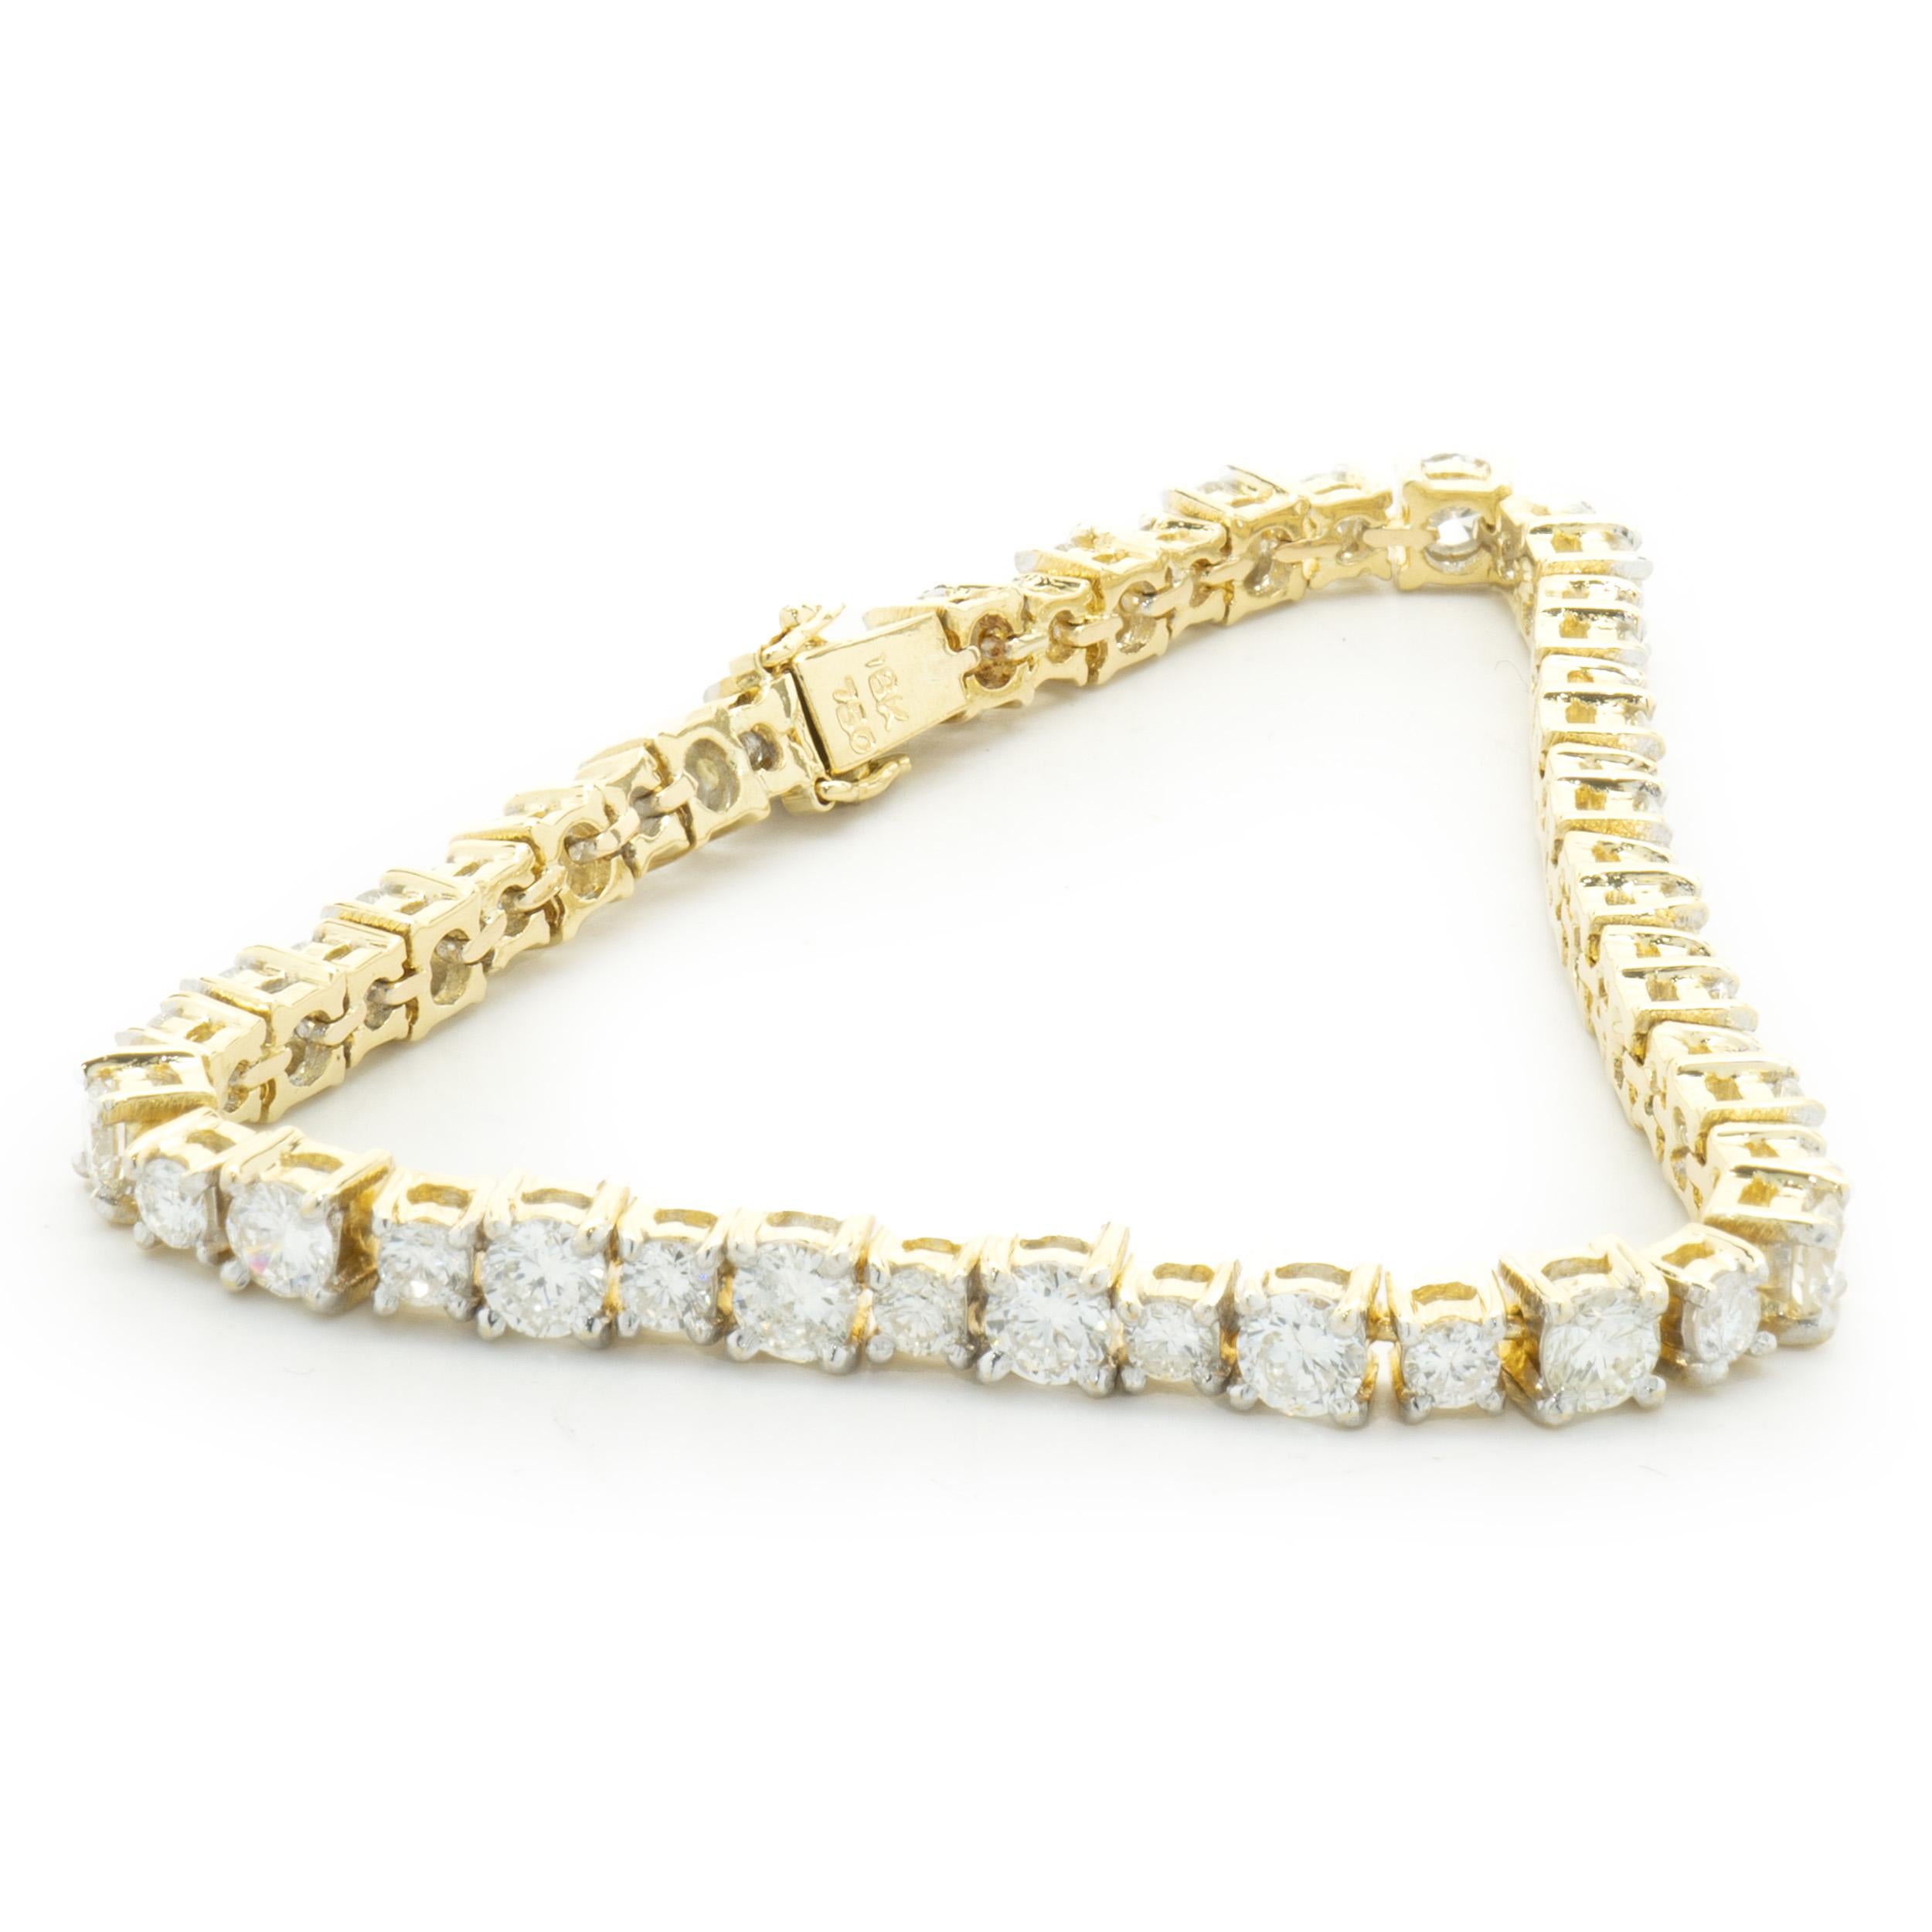 Designer: custom design
Material: 18K yellow gold
Diamond:48 round brilliant cut = 4.00cttw
Color: H
Clarity: VS1-2
Dimensions: bracelet will fit up to a 5.75-inch wrist
Weight: 11.07 grams
